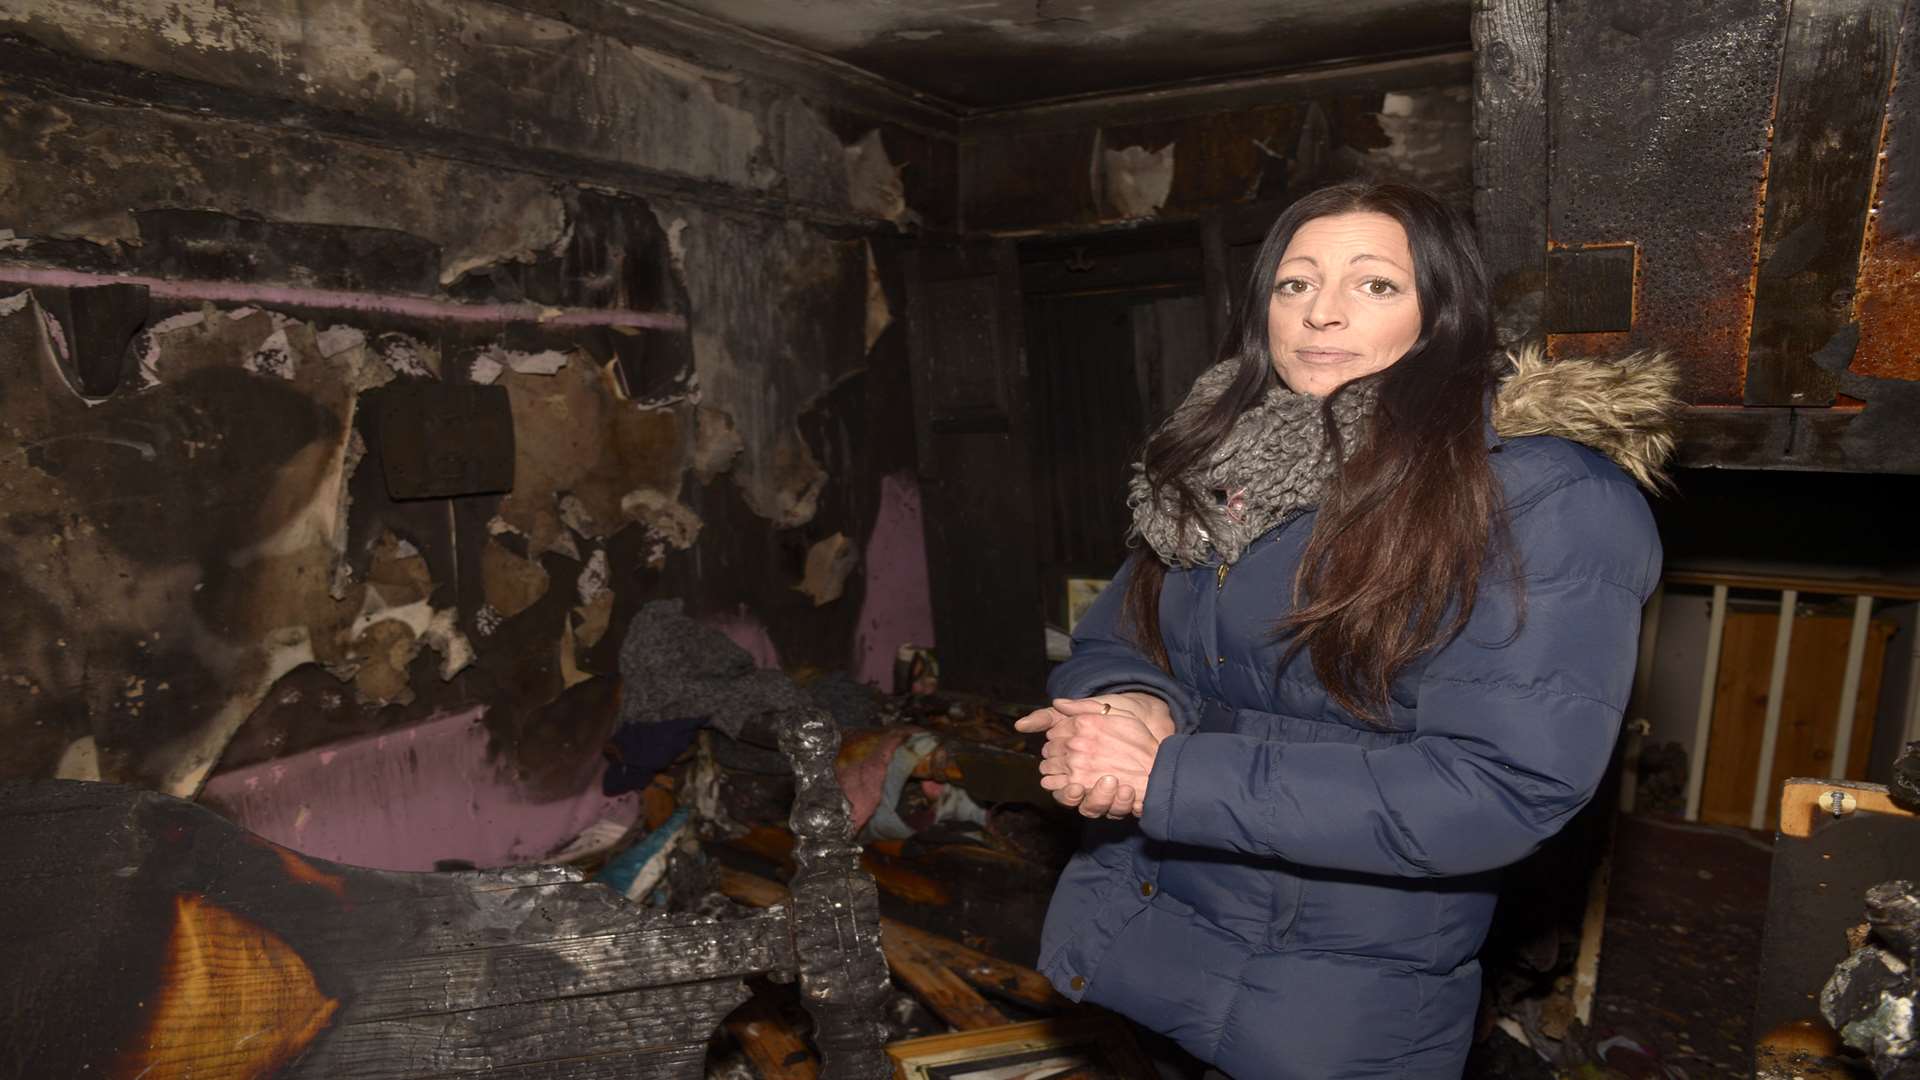 Jamie Price lost everything as flames ripped through her home